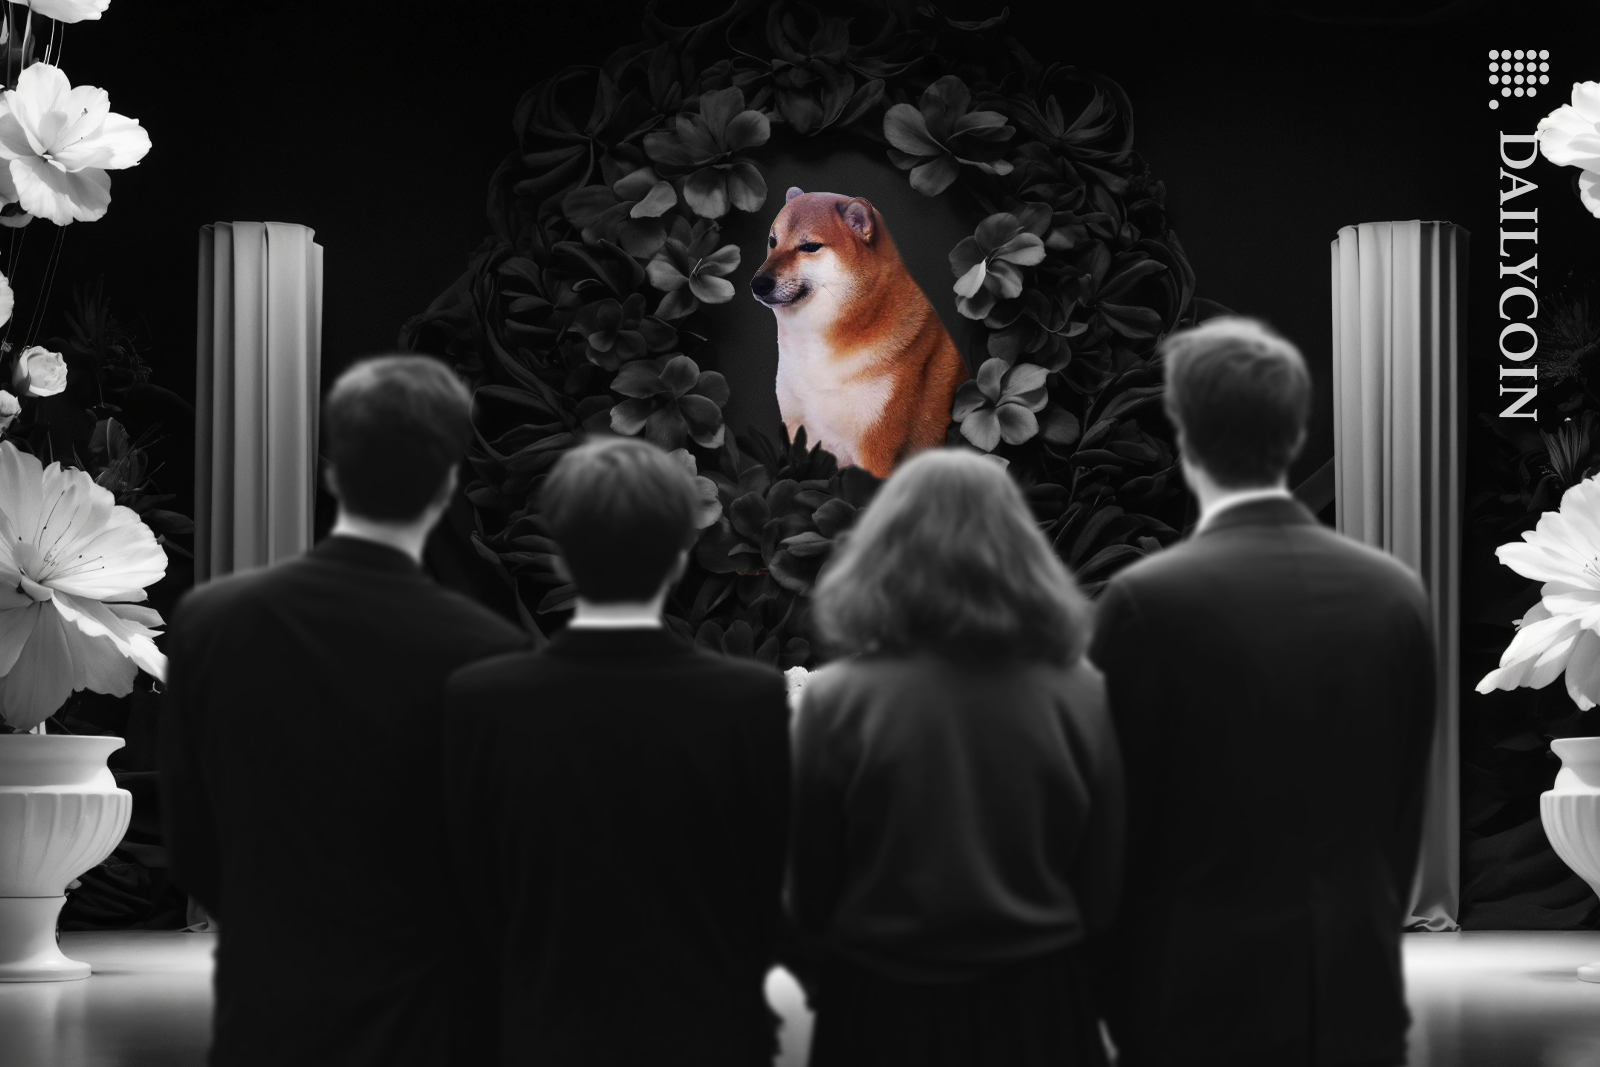 A group of people mourning the DOGE dog.